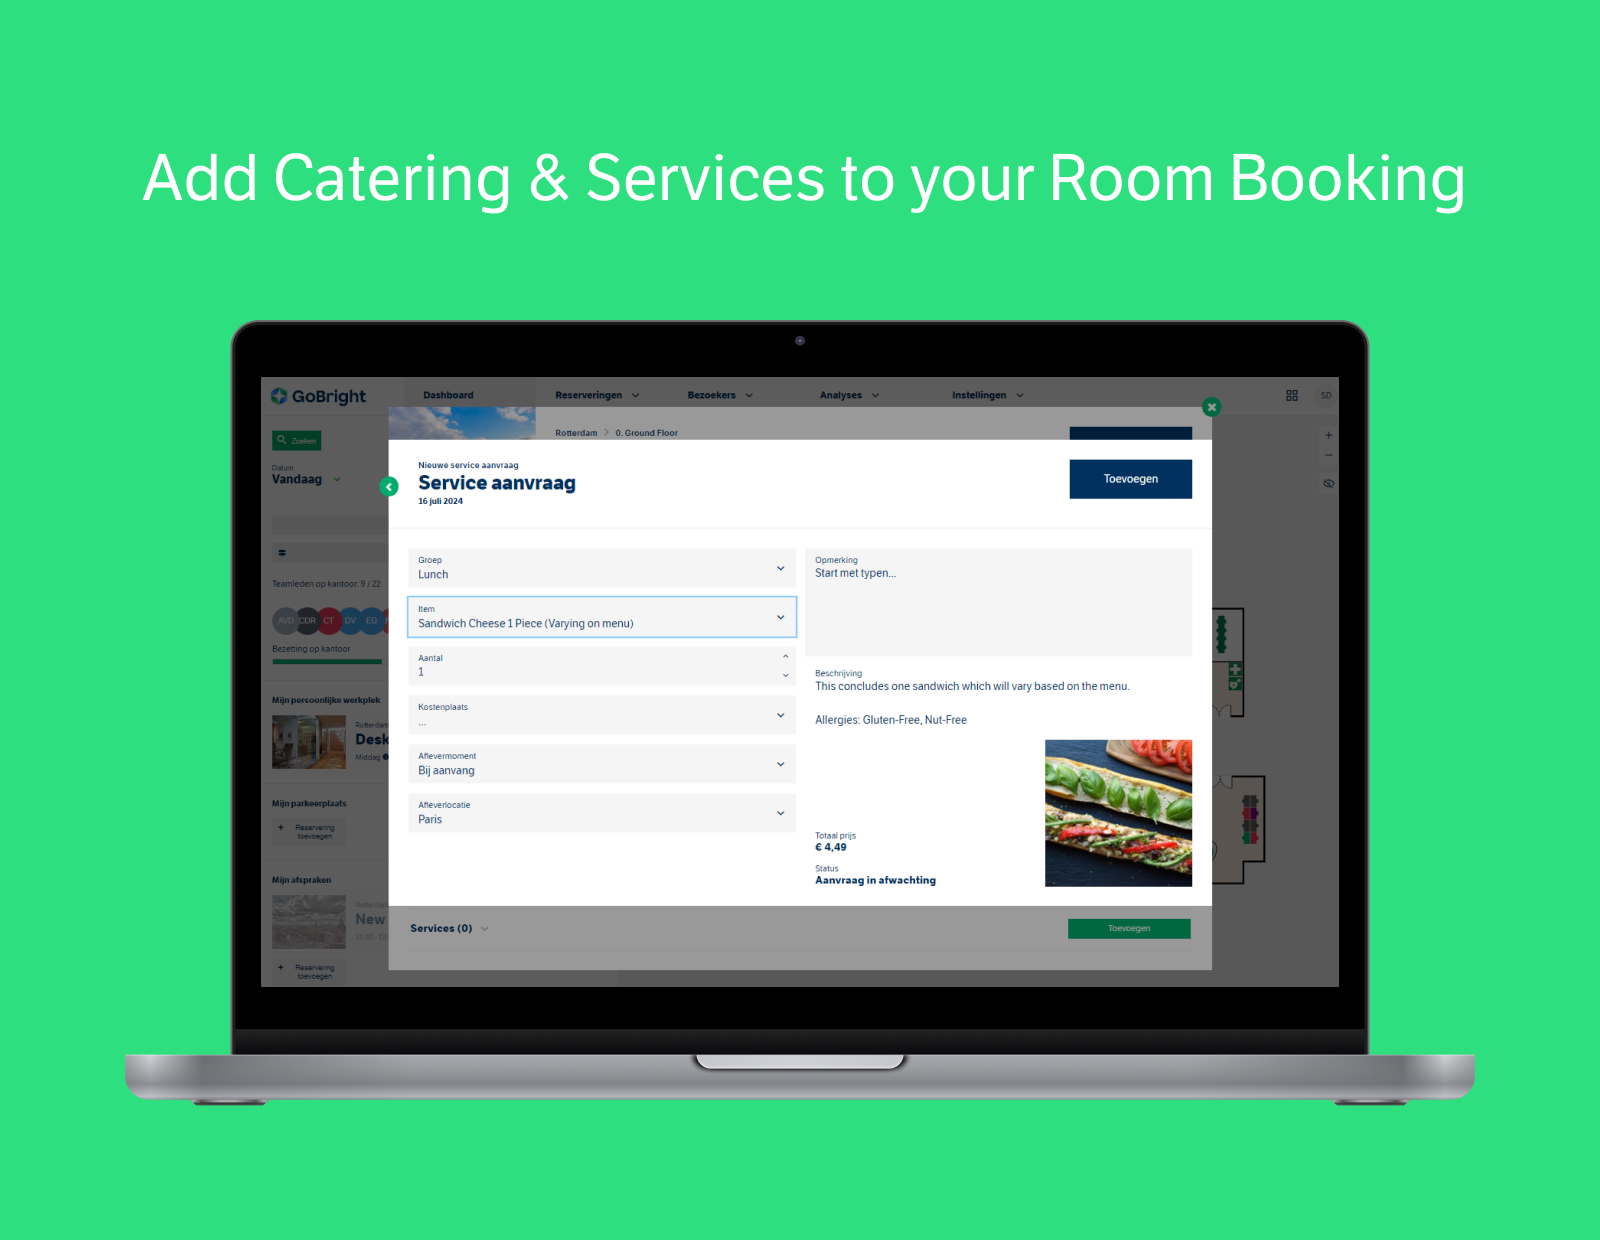 GoBright - Room Booking System - Catering & Services